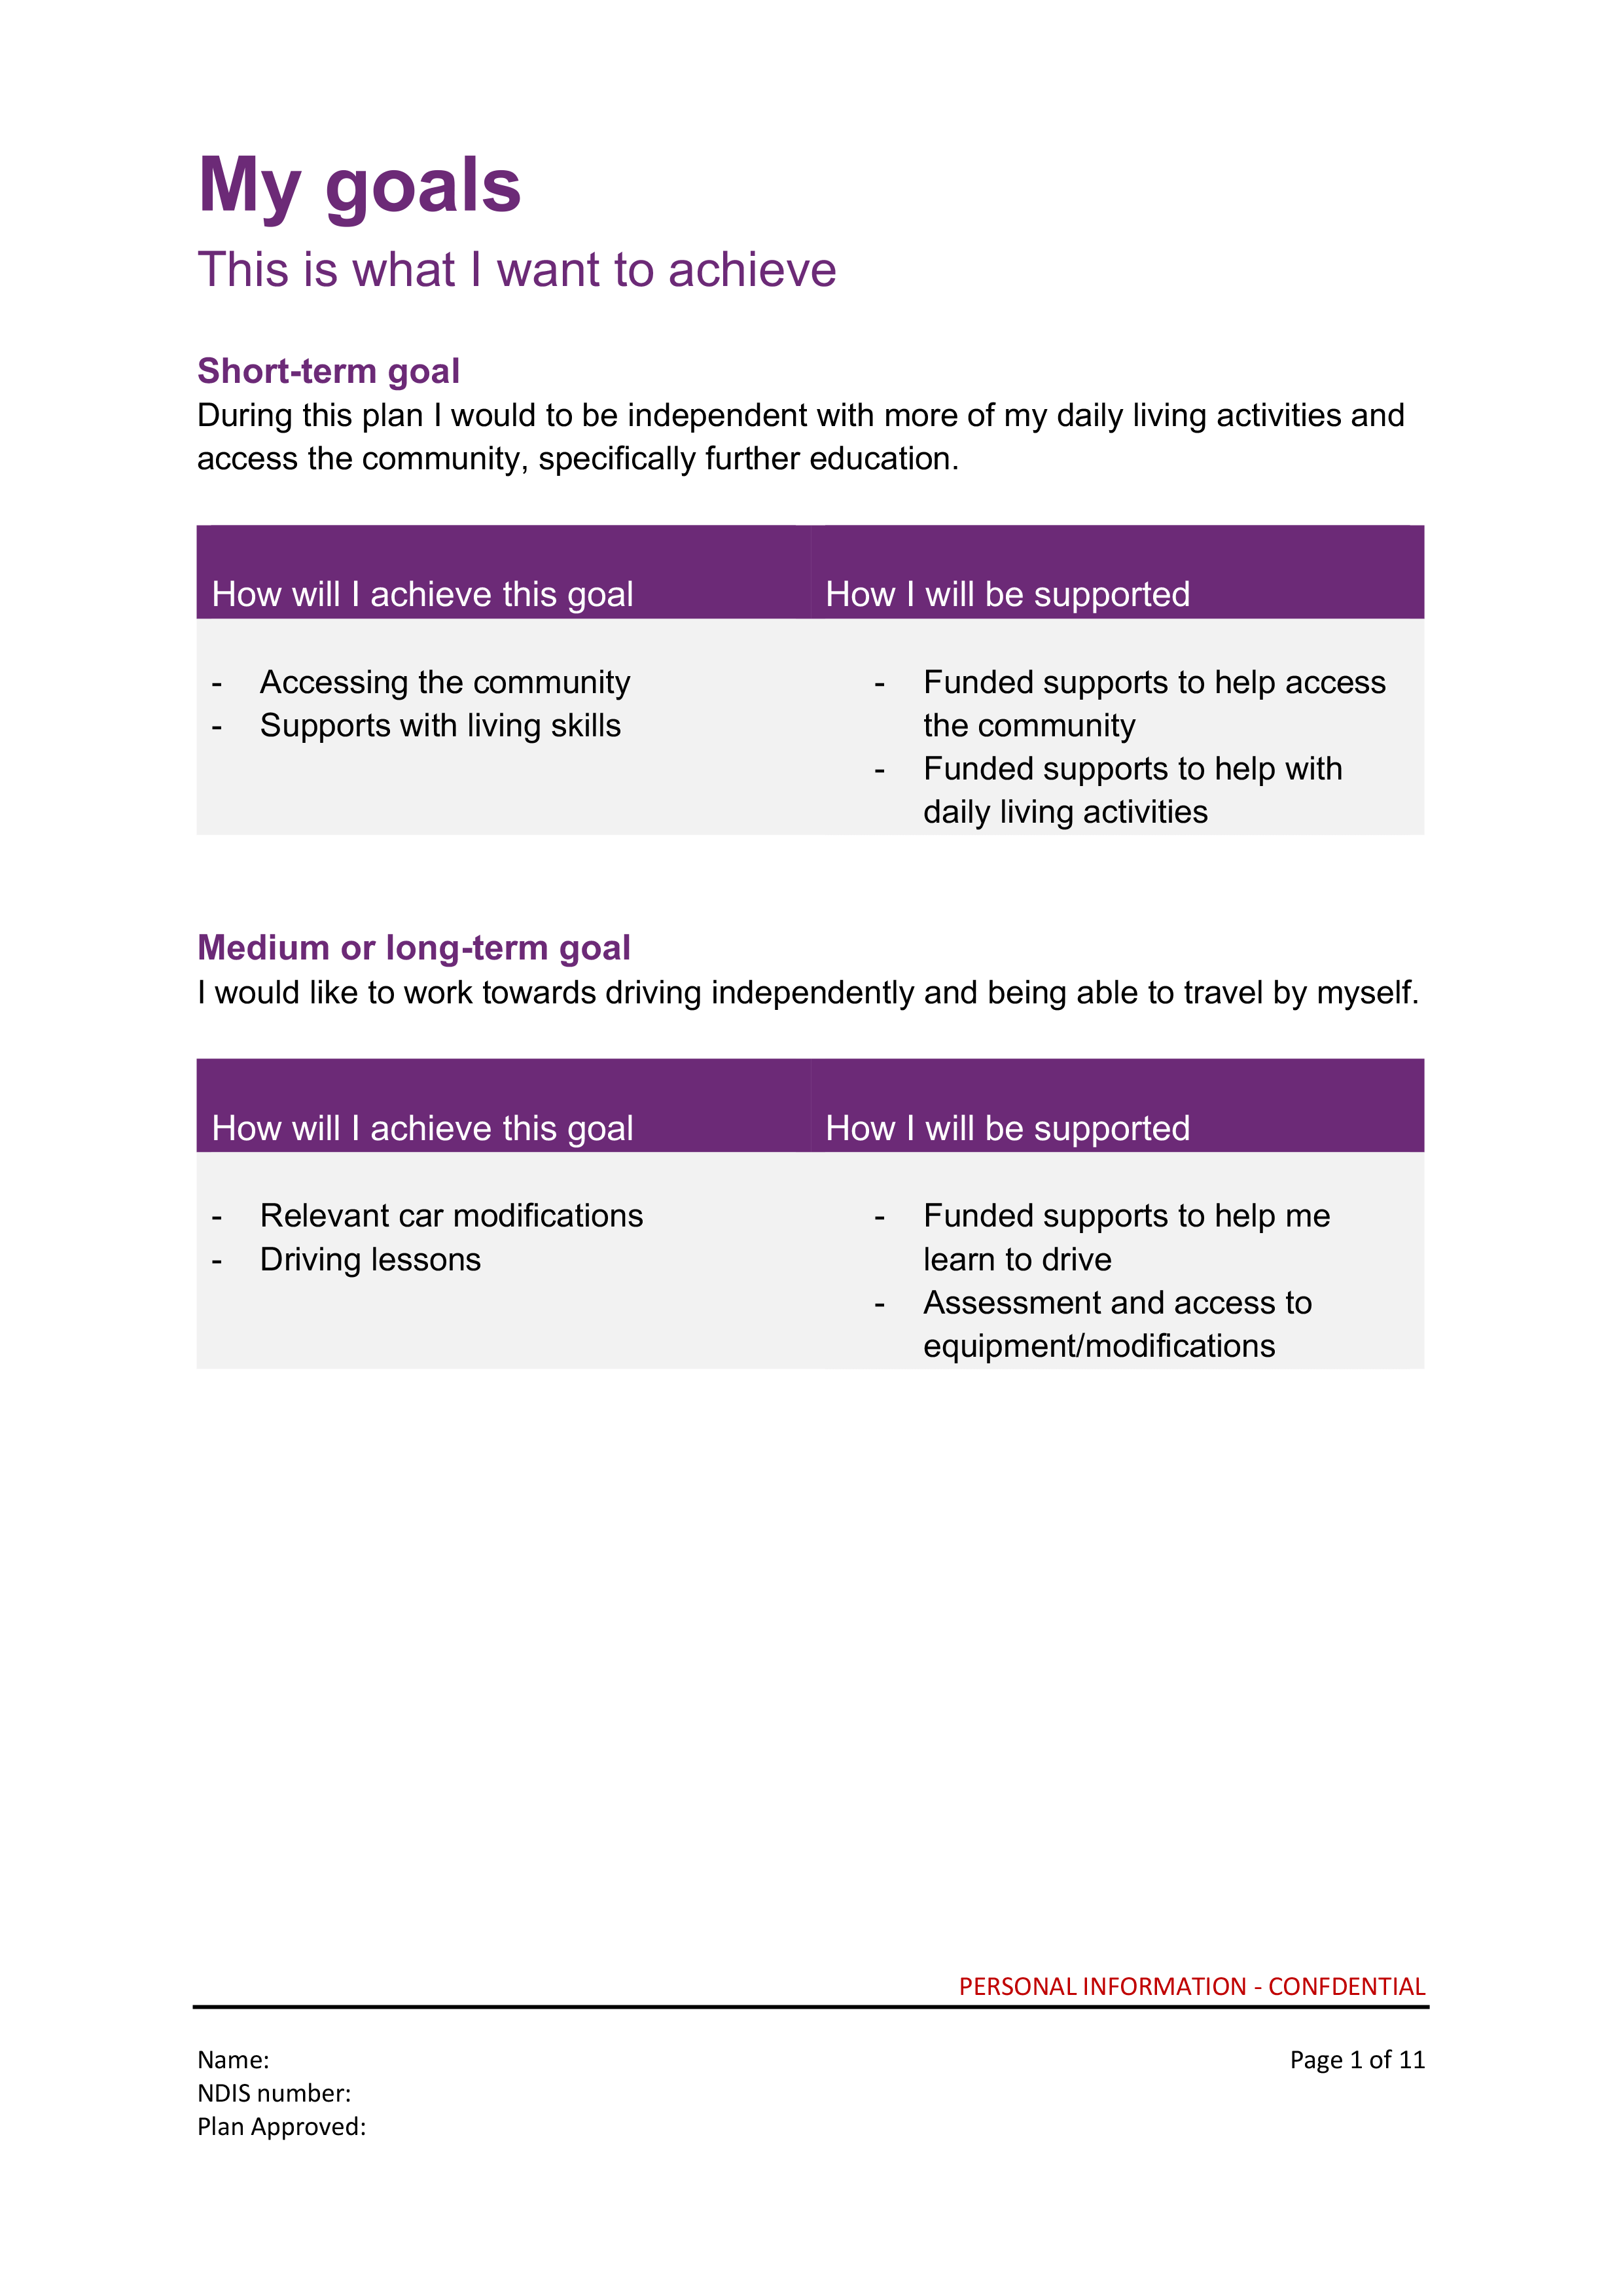 ndis business plan example